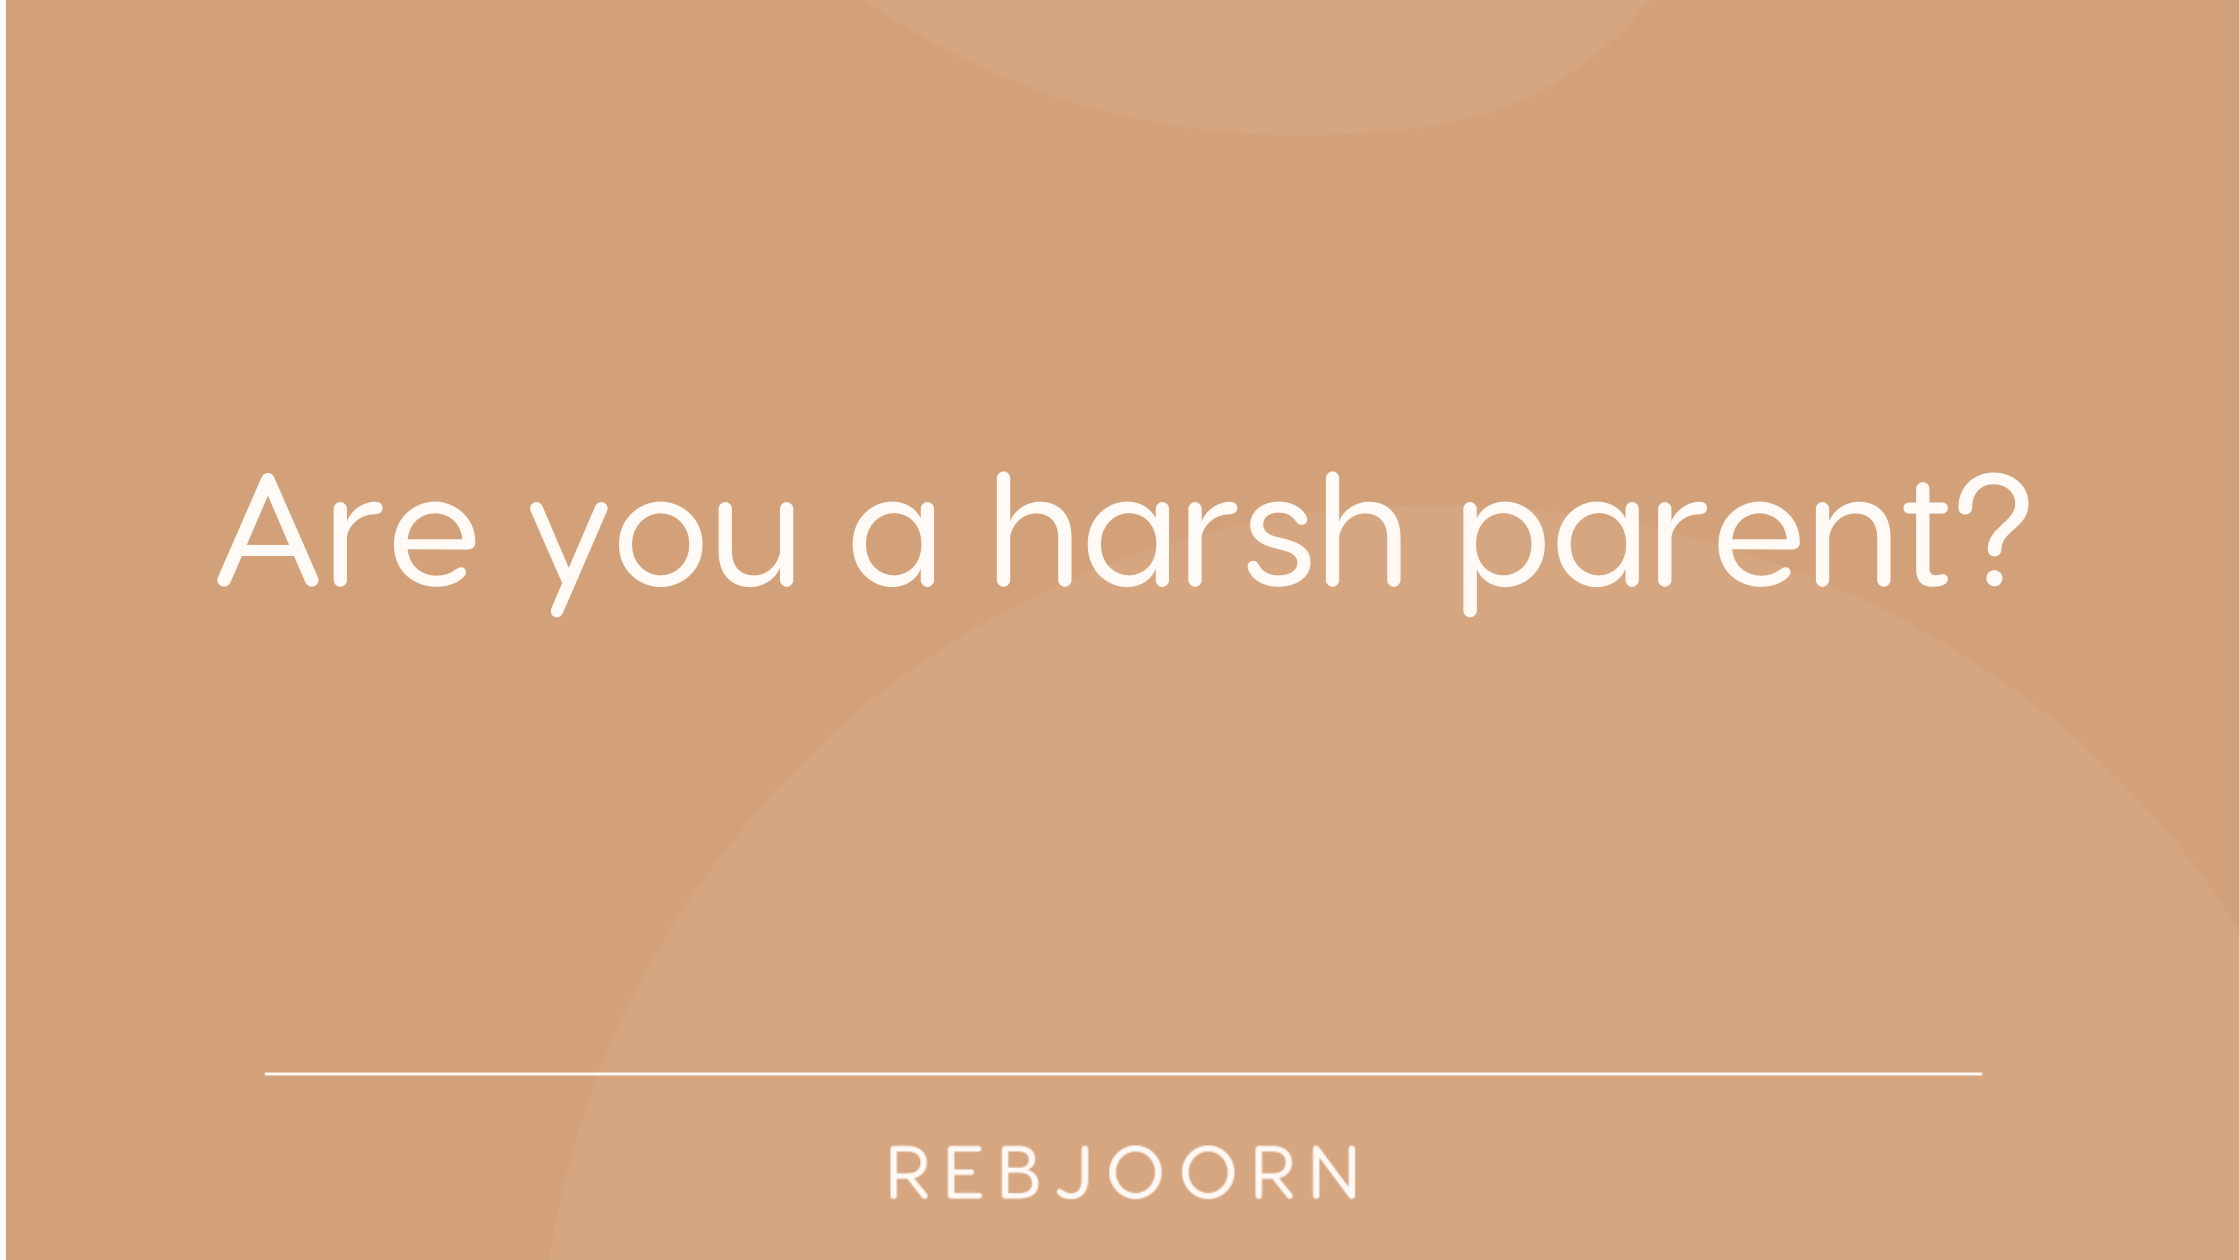 Are you a harsh parent?